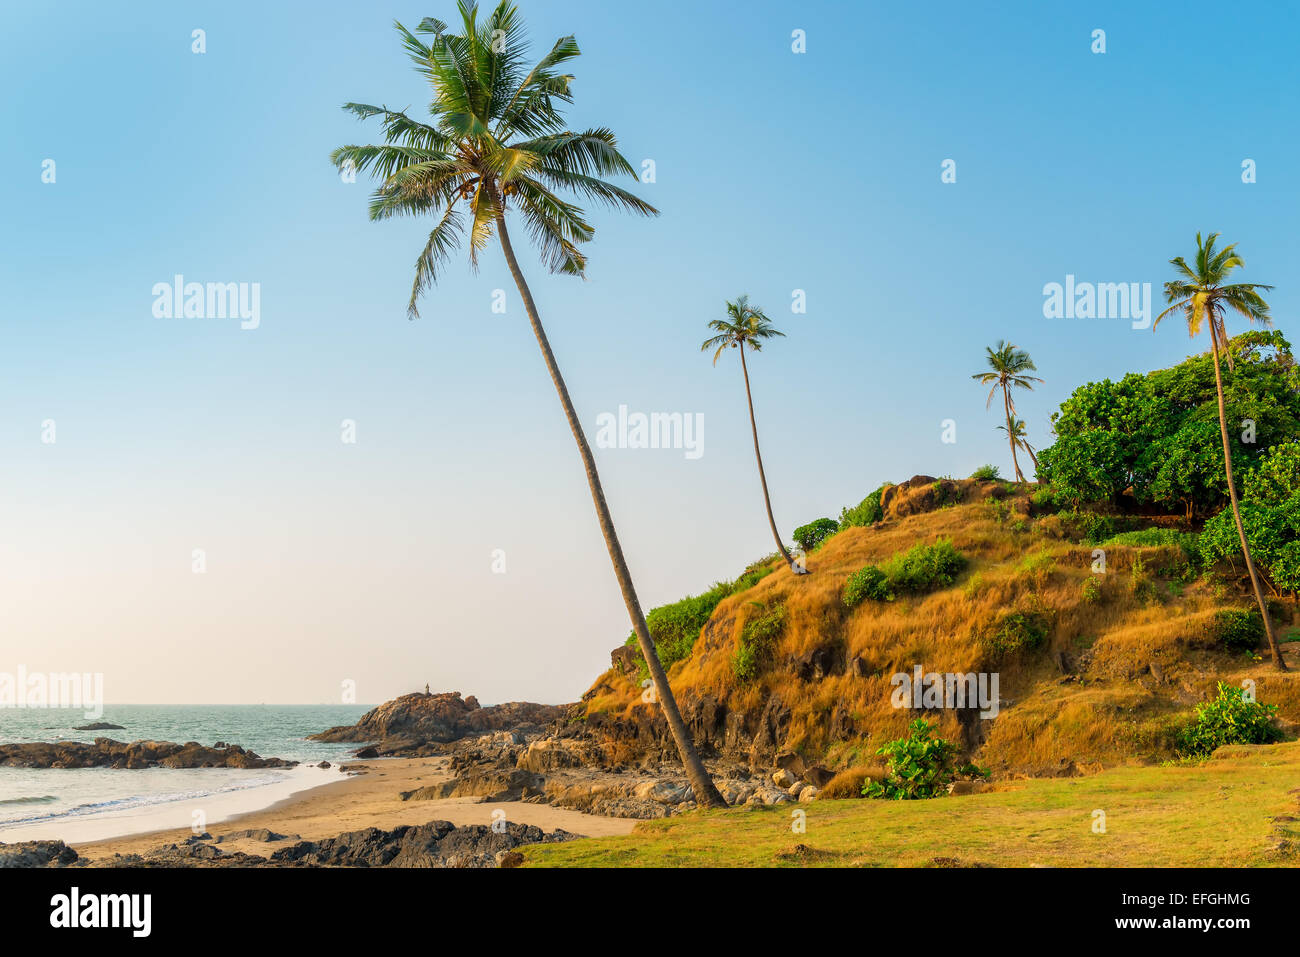 hill with coconut palm trees in a tropical resort location Stock Photo